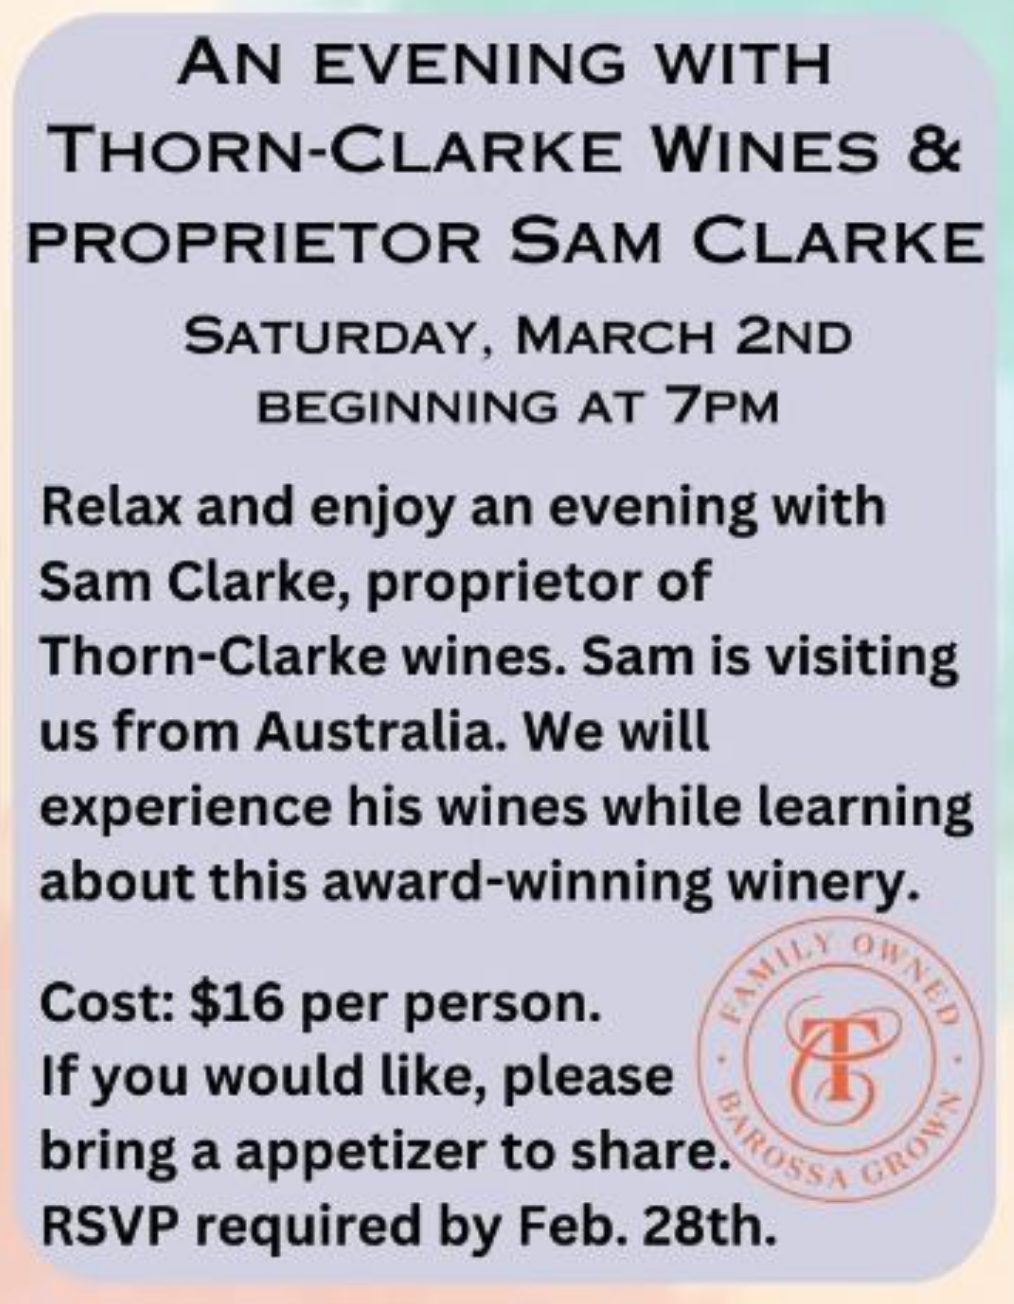 An Evening with Thorn-Clarke Wines and Proprietor Sam Clarke